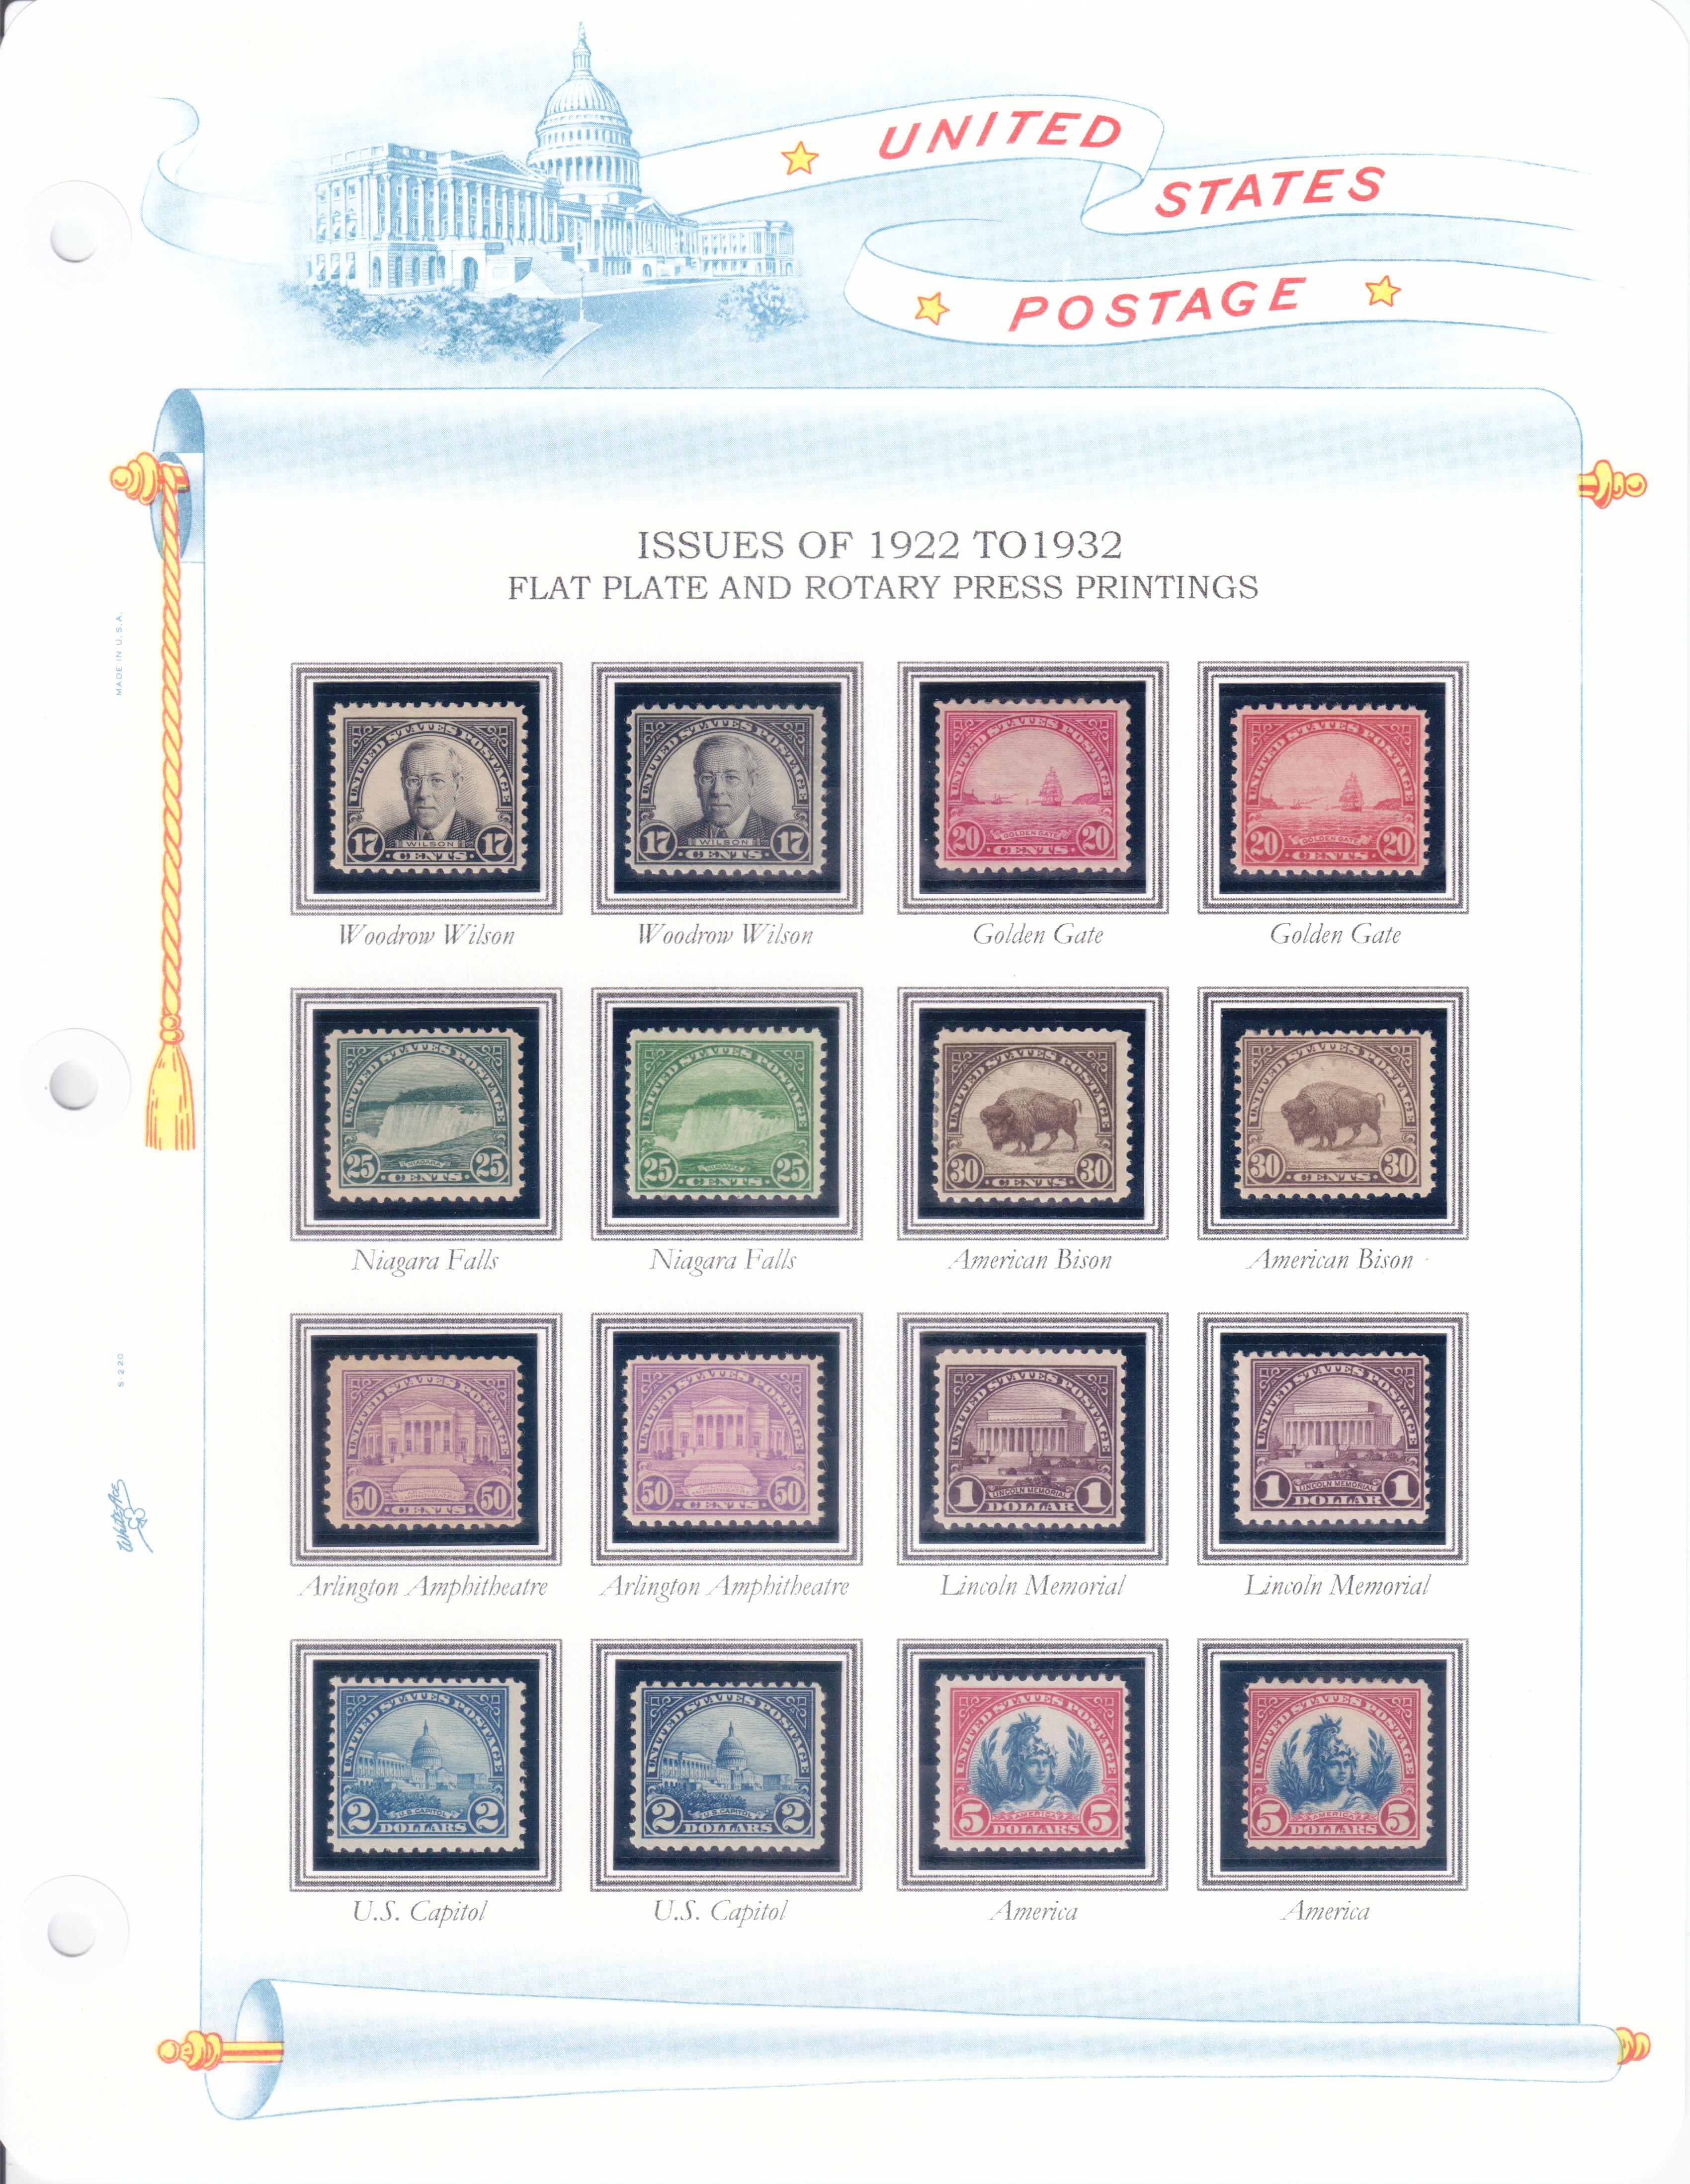 White Ace Historical Postage Stamp Album Of The United Nations – Cool Stuff  PD